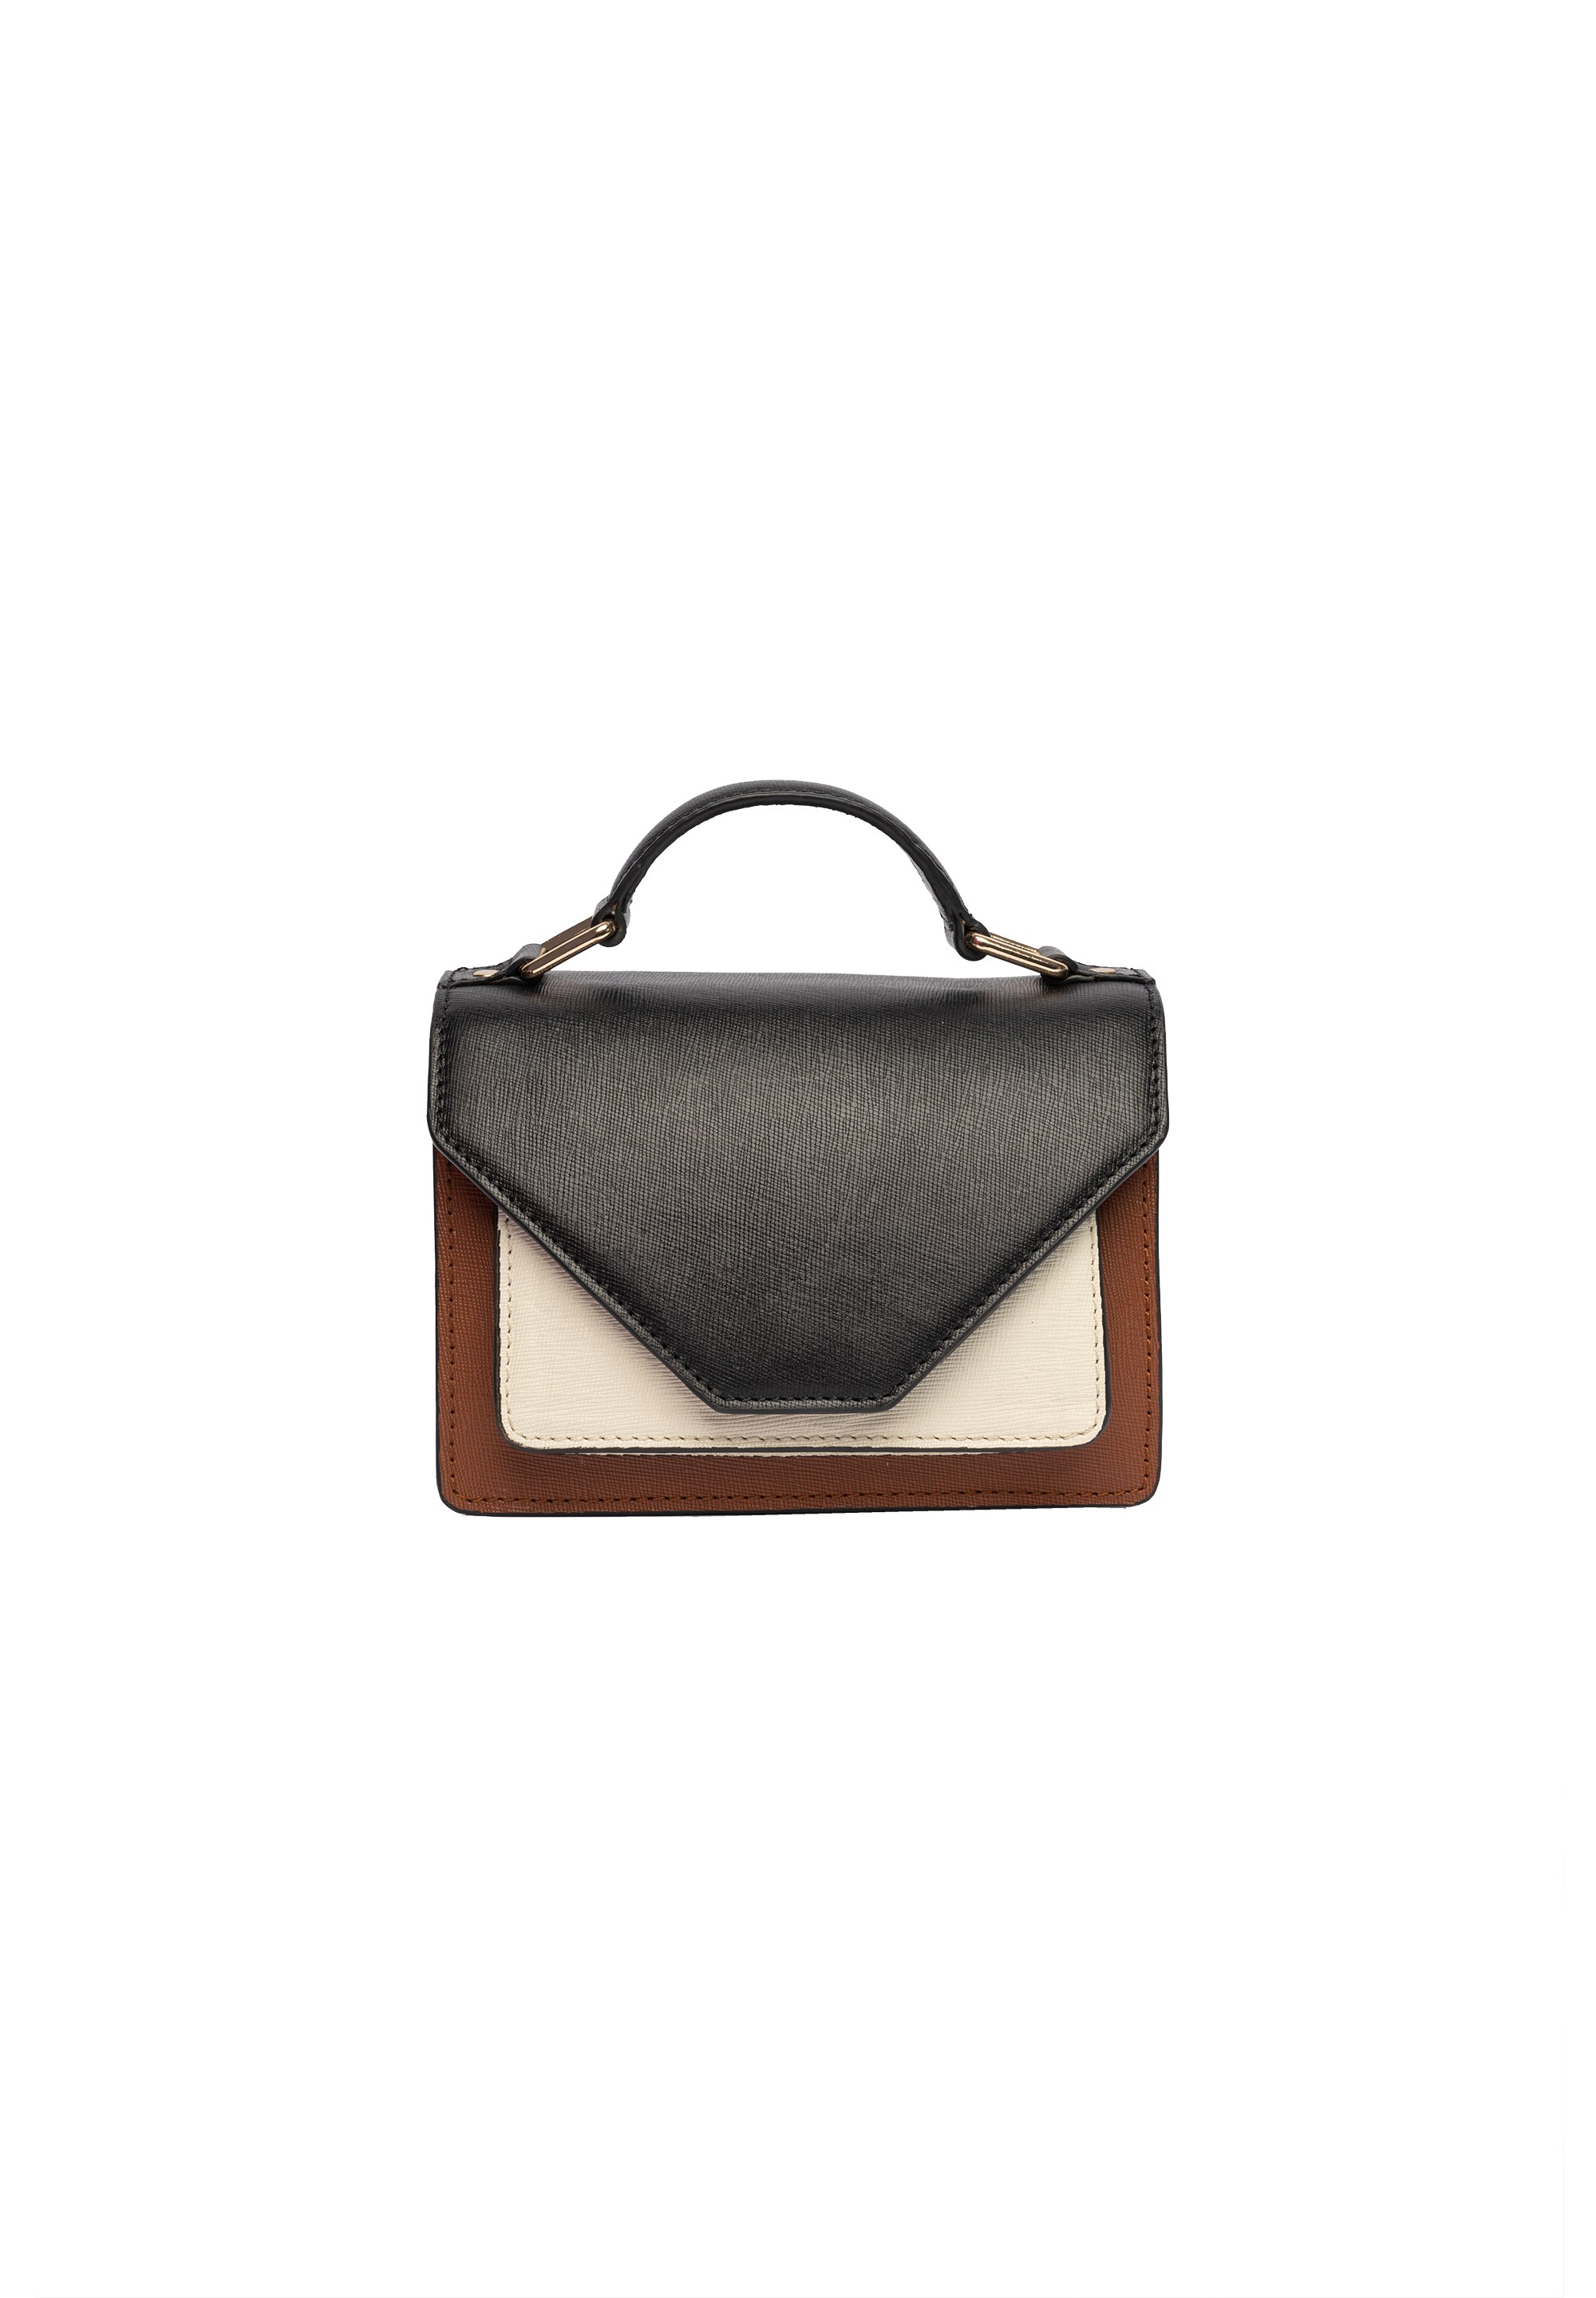 Re:Designed by Dixie - Small Bag Cognac/Offwhite/Black